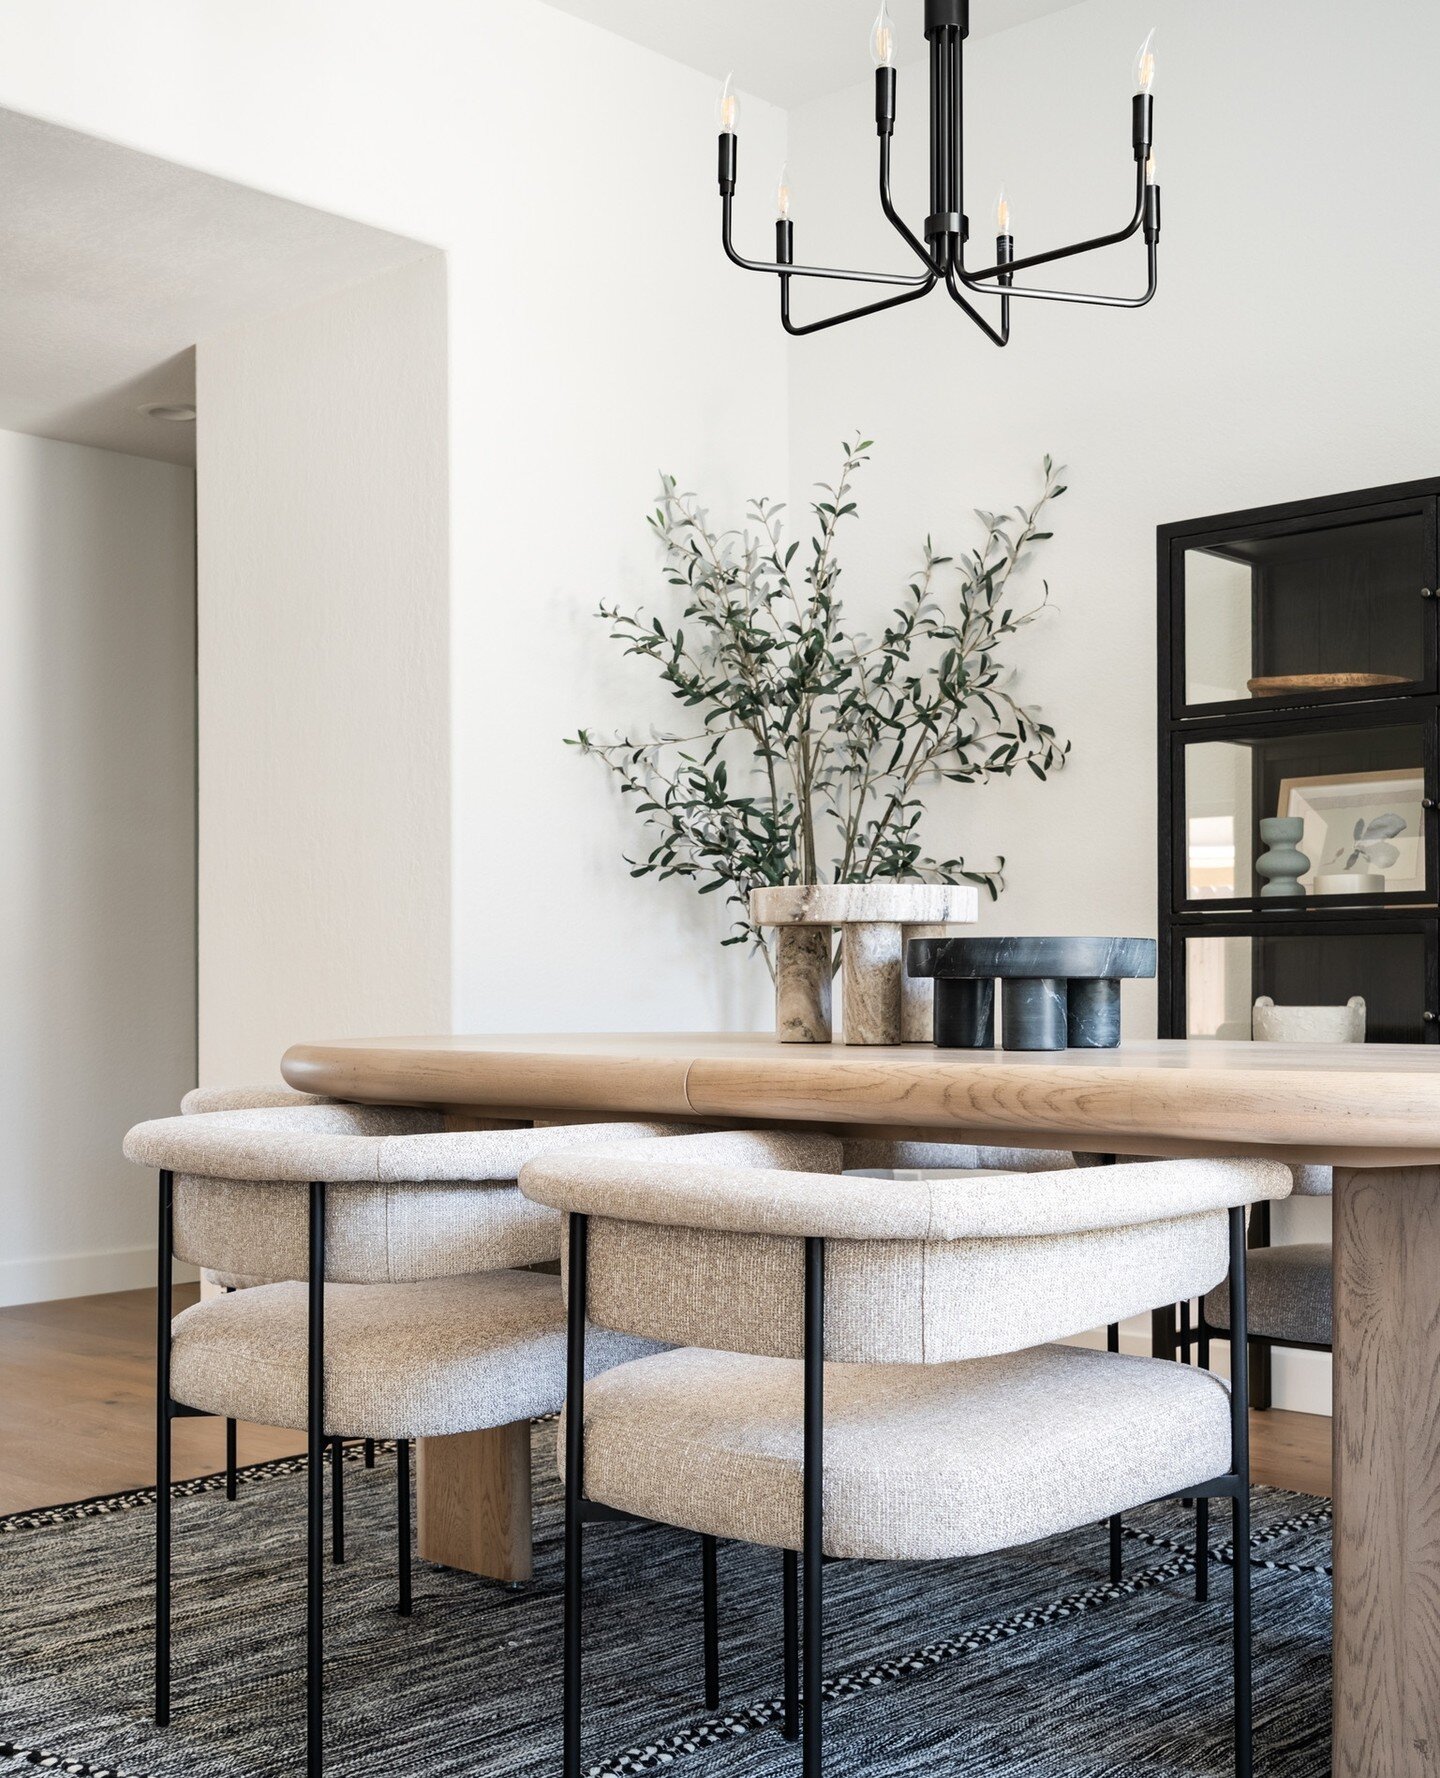 These beautifully sculpted iron-framed dining chairs are the perfect statement piece for this modern dining room. ⁠
⁠
⁠
⁠
⁠
⁠
📸: @sandiegointeriorphotography⁠
⁠
⁠
⁠
⁠
#avenidasivritaproject #sandiego #interiorinspo #myseasonalstyling #interiorforall